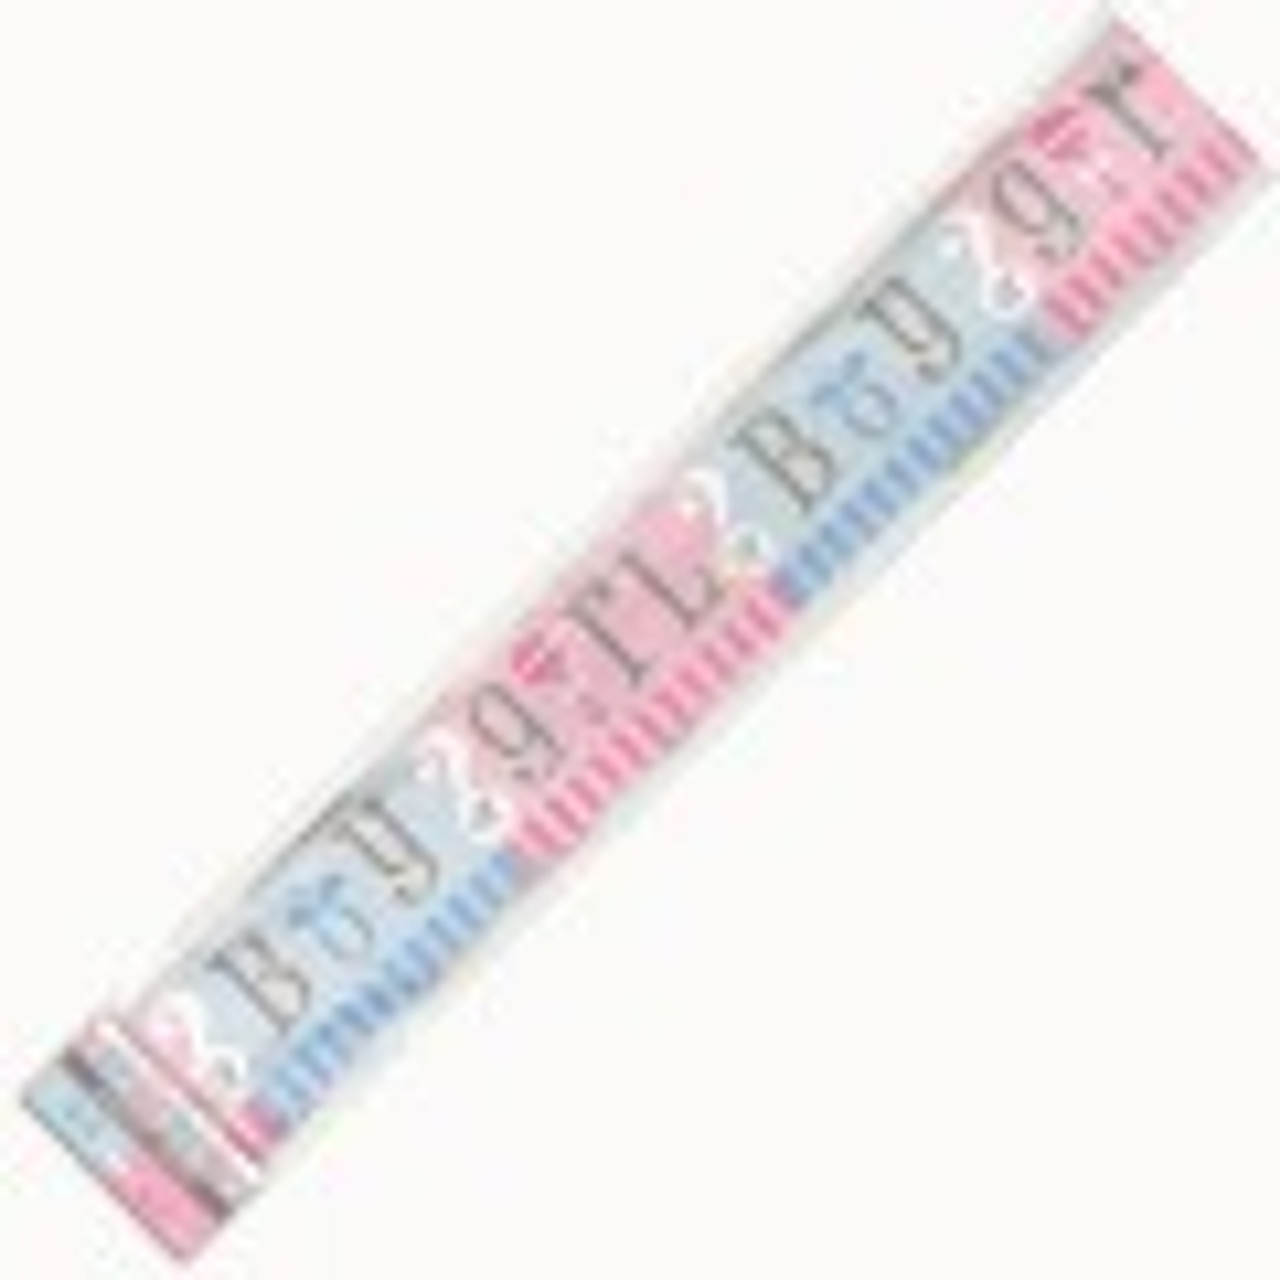 47398 BABY REVEAL FOIL BANNER 3.6M